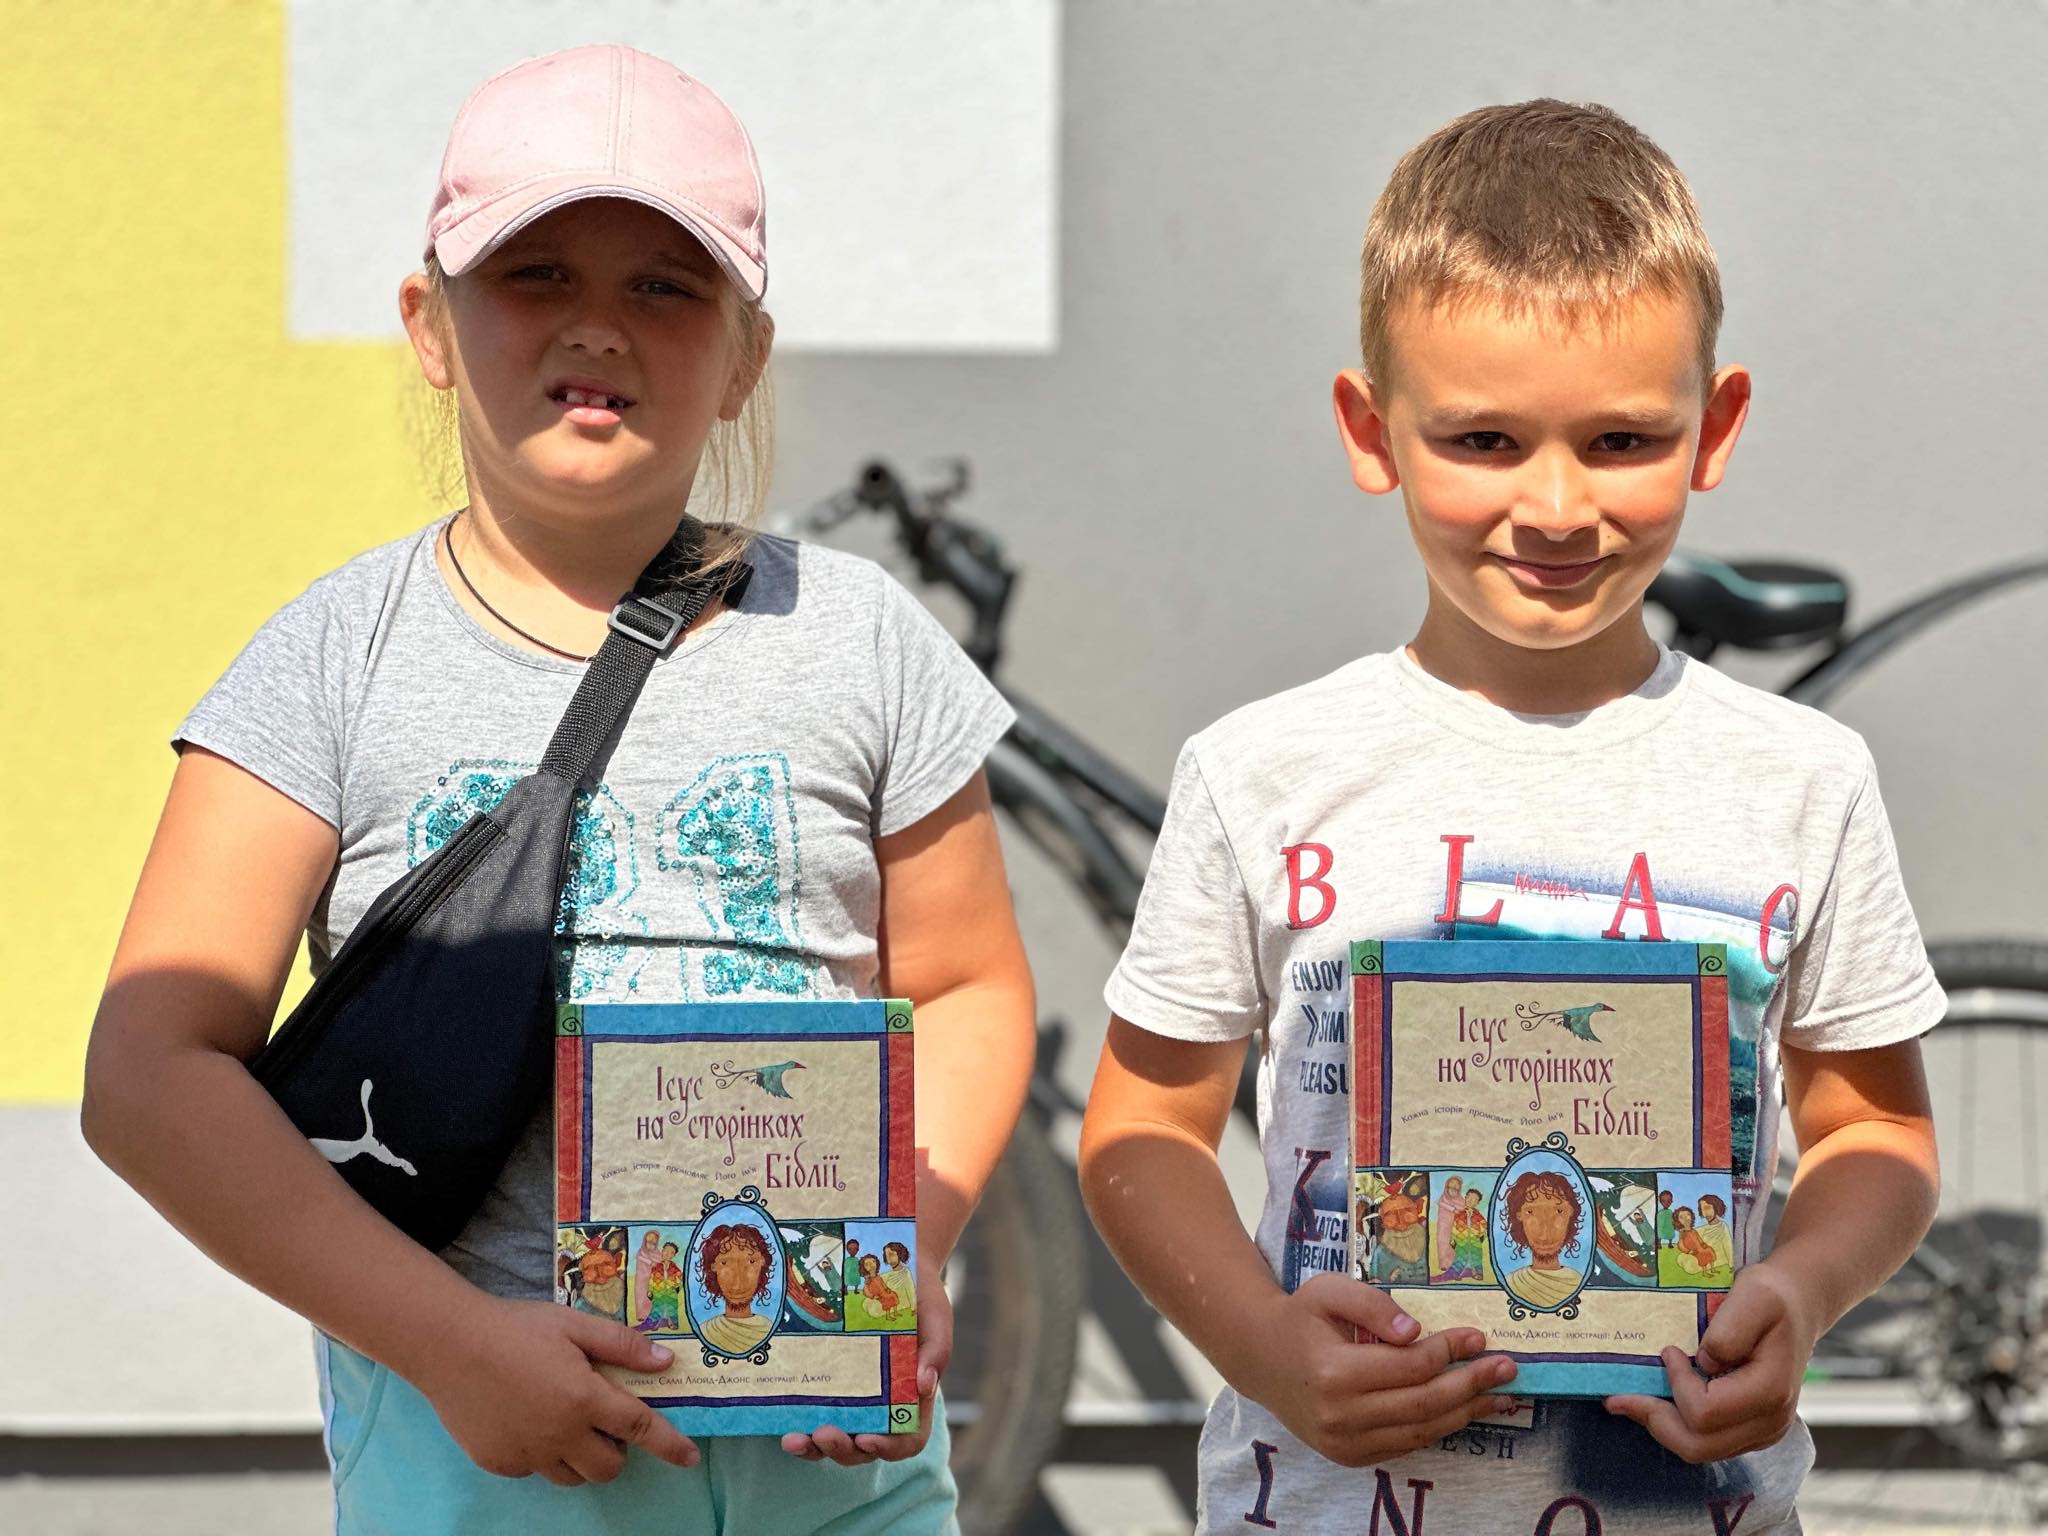 A young boy and a girl wolding copies of the Jesus Storybook Bible that they have been given